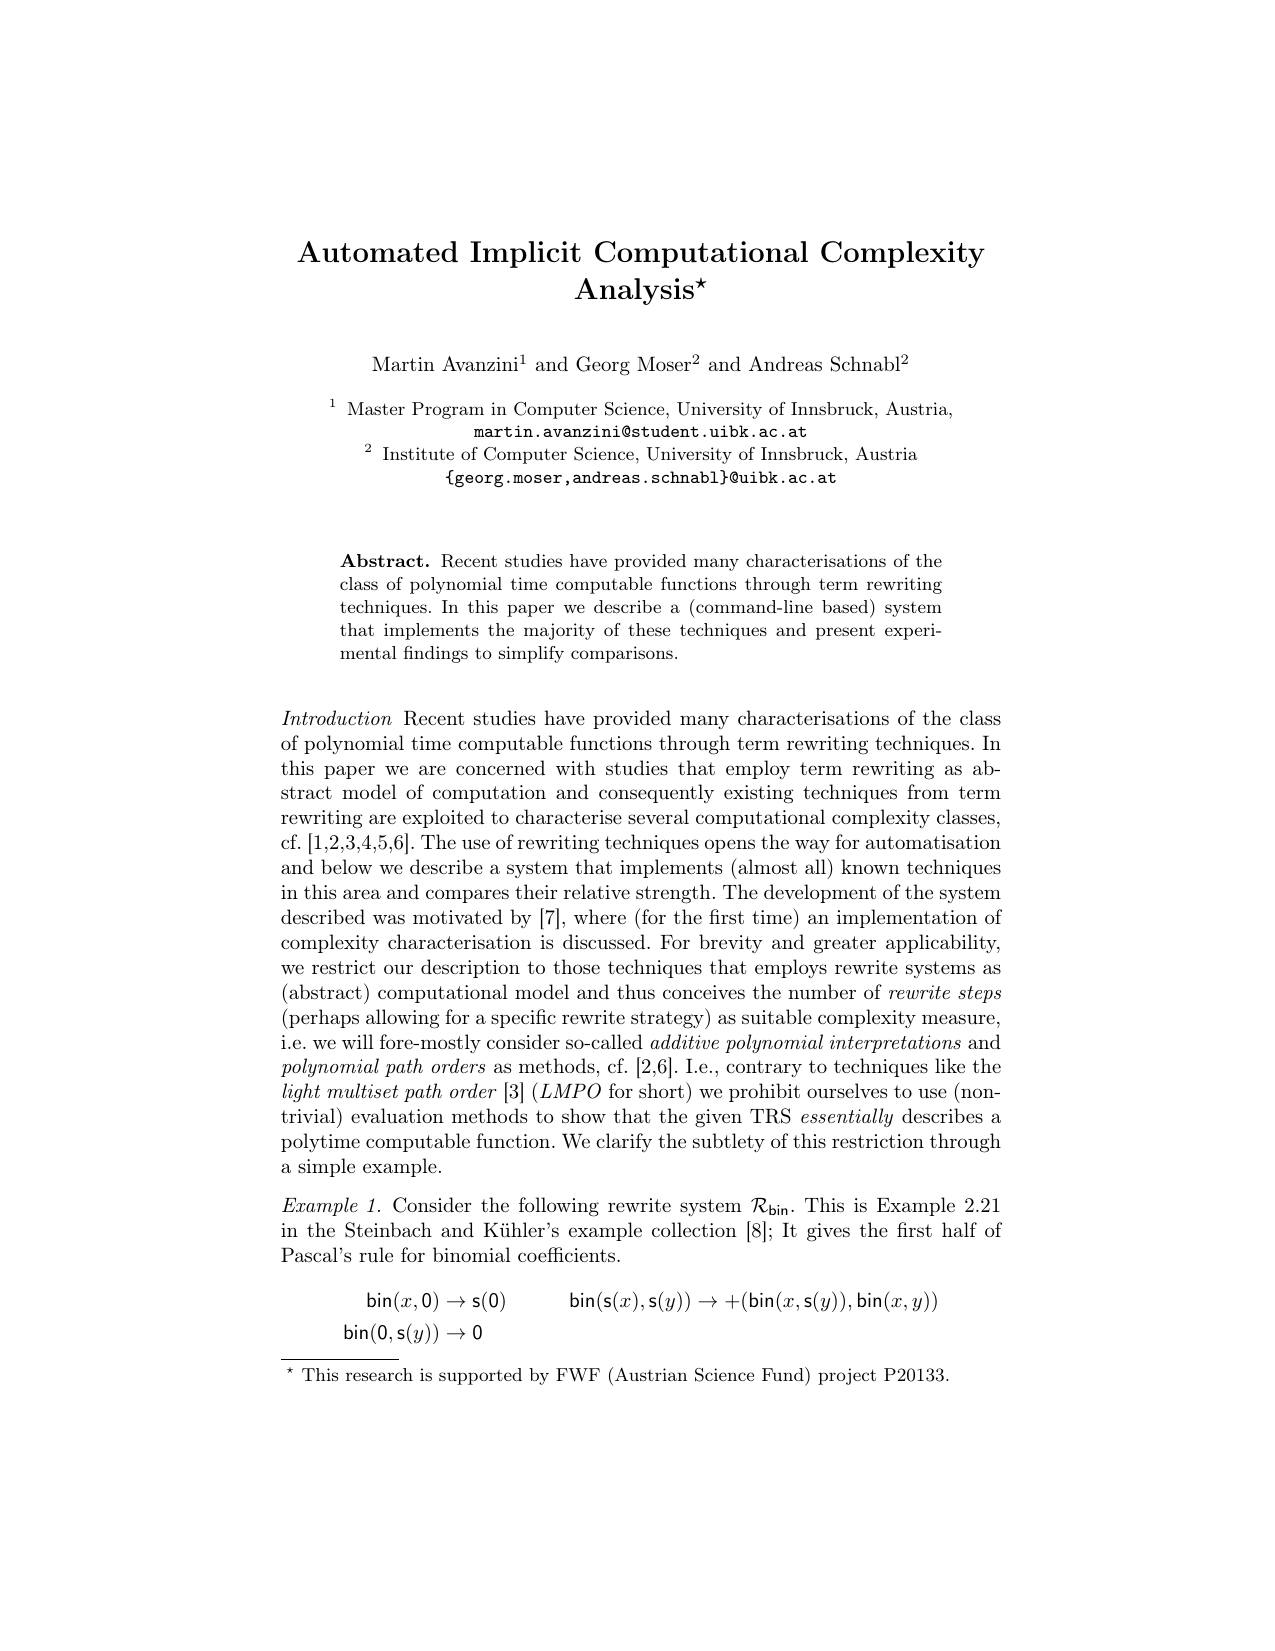 Automated Implicit Computational Complexity Analysis (System Description)